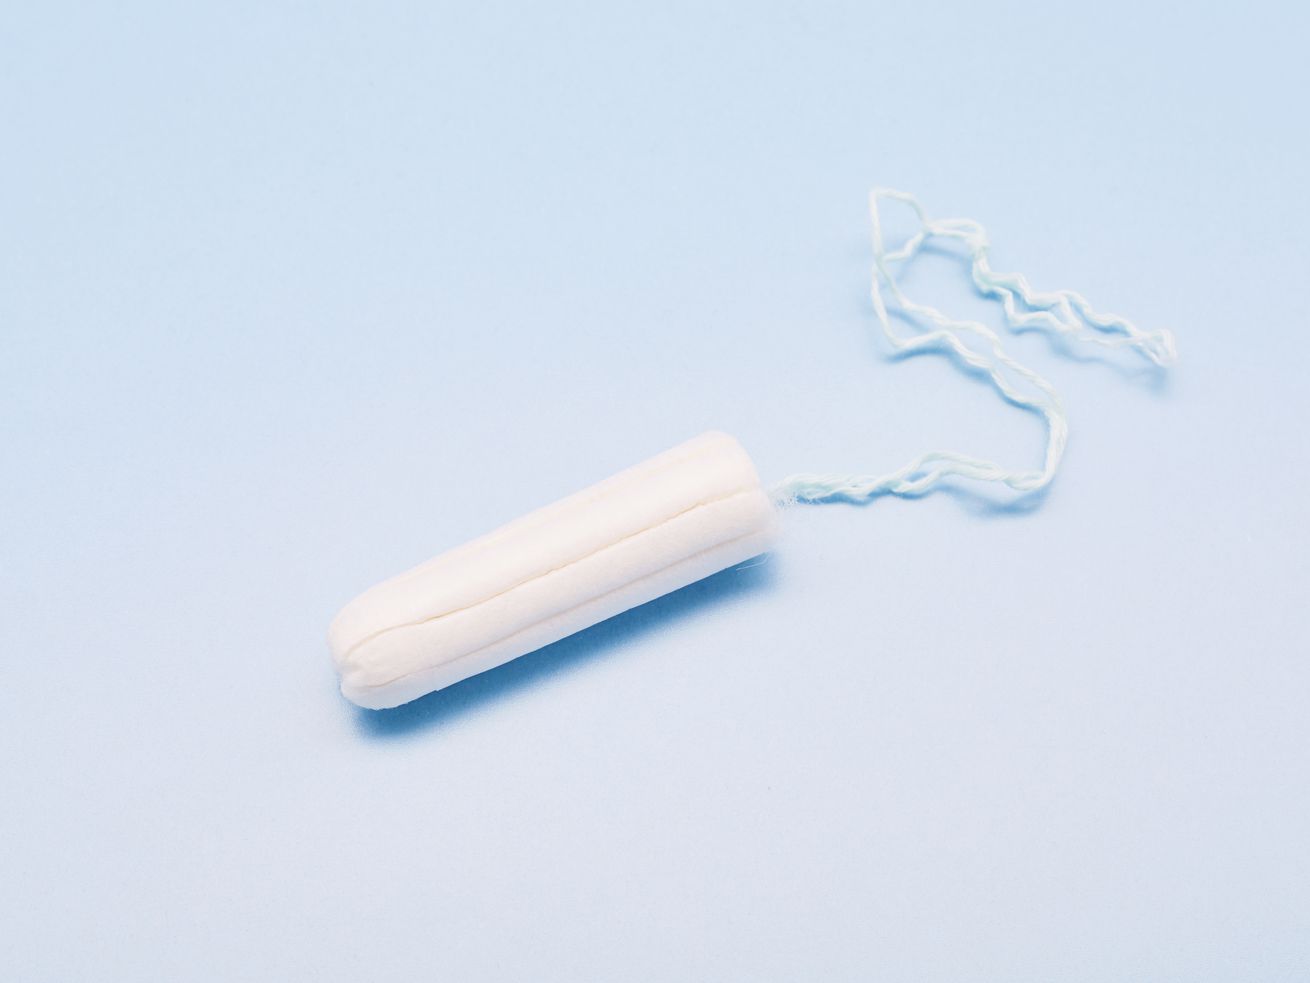 A tampon on a blue background